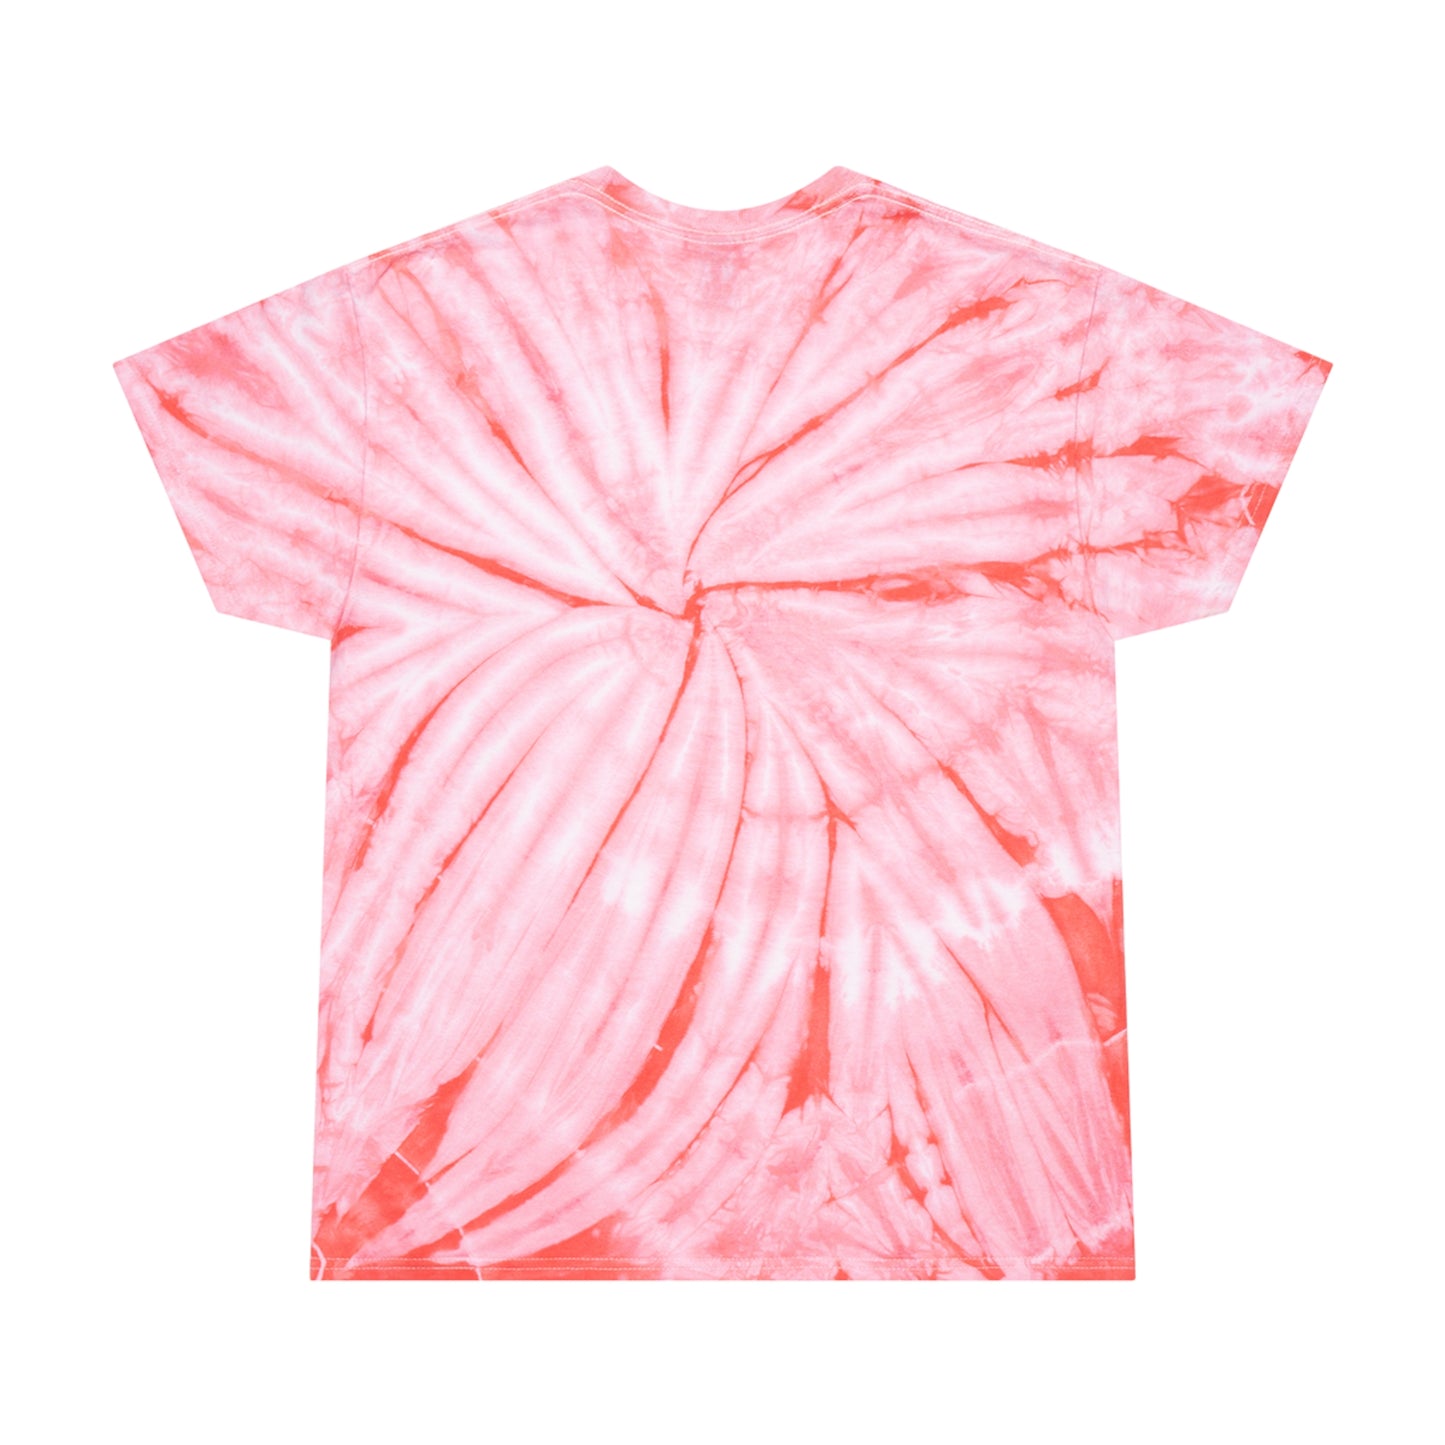 Competition Mode Activated Baton Twirler Cyclone Tie-Dye Tee, Birthday Gift for Twirler Daughter